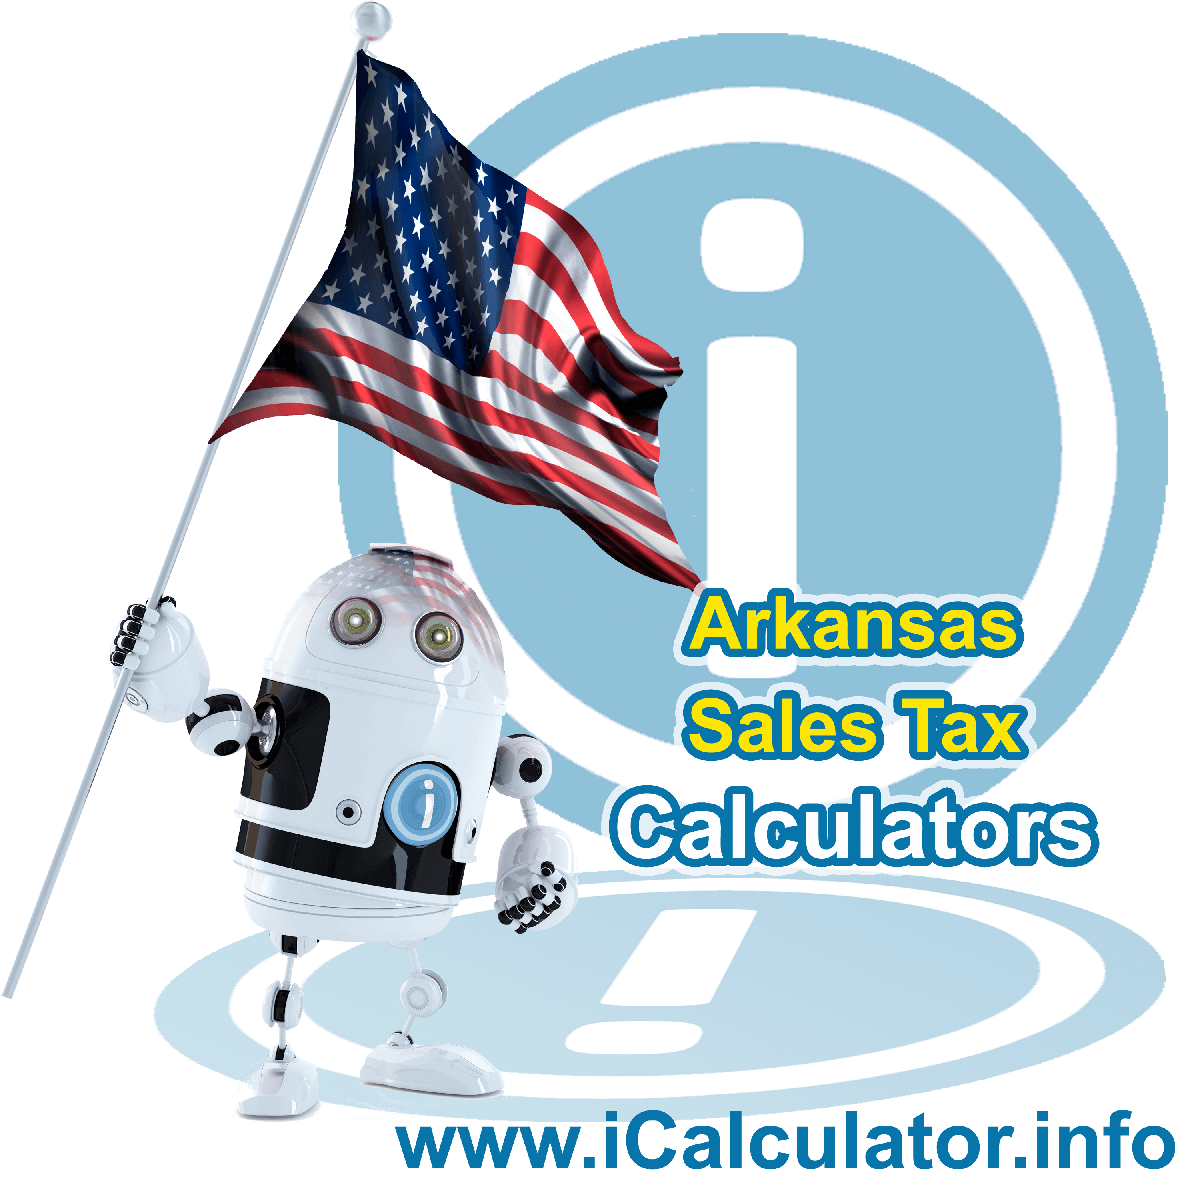 Alexander Sales Rates: This image illustrates a calculator robot calculating Alexander sales tax manually using the Alexander Sales Tax Formula. You can use this information to calculate Alexander Sales Tax manually or use the Alexander Sales Tax Calculator to calculate sales tax online.